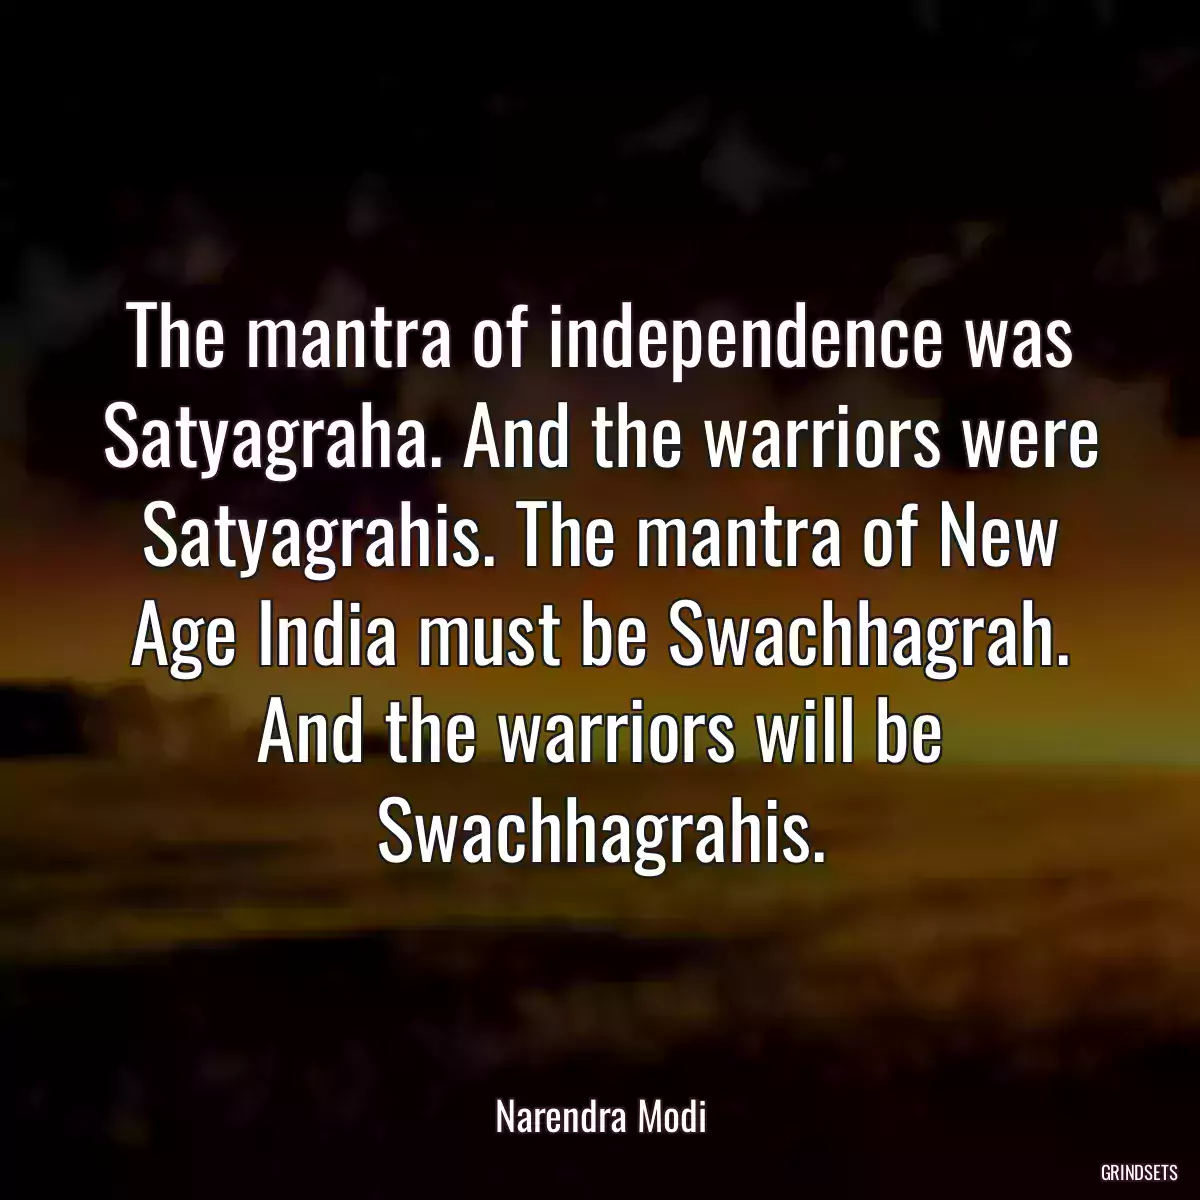 The mantra of independence was Satyagraha. And the warriors were Satyagrahis. The mantra of New Age India must be Swachhagrah. And the warriors will be Swachhagrahis.